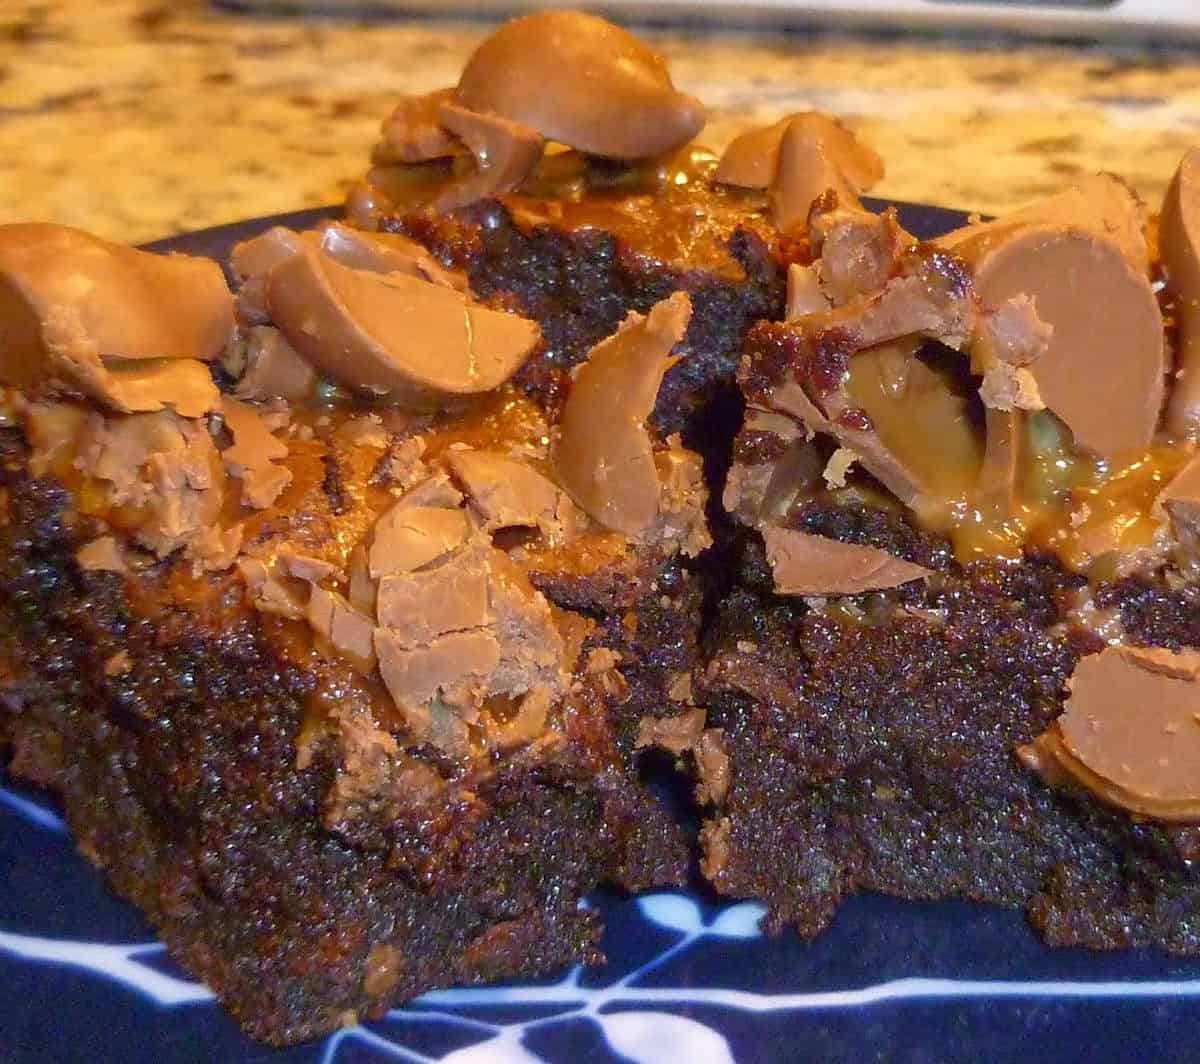  These brownies are so rich and decadent, you won't be able to have just one